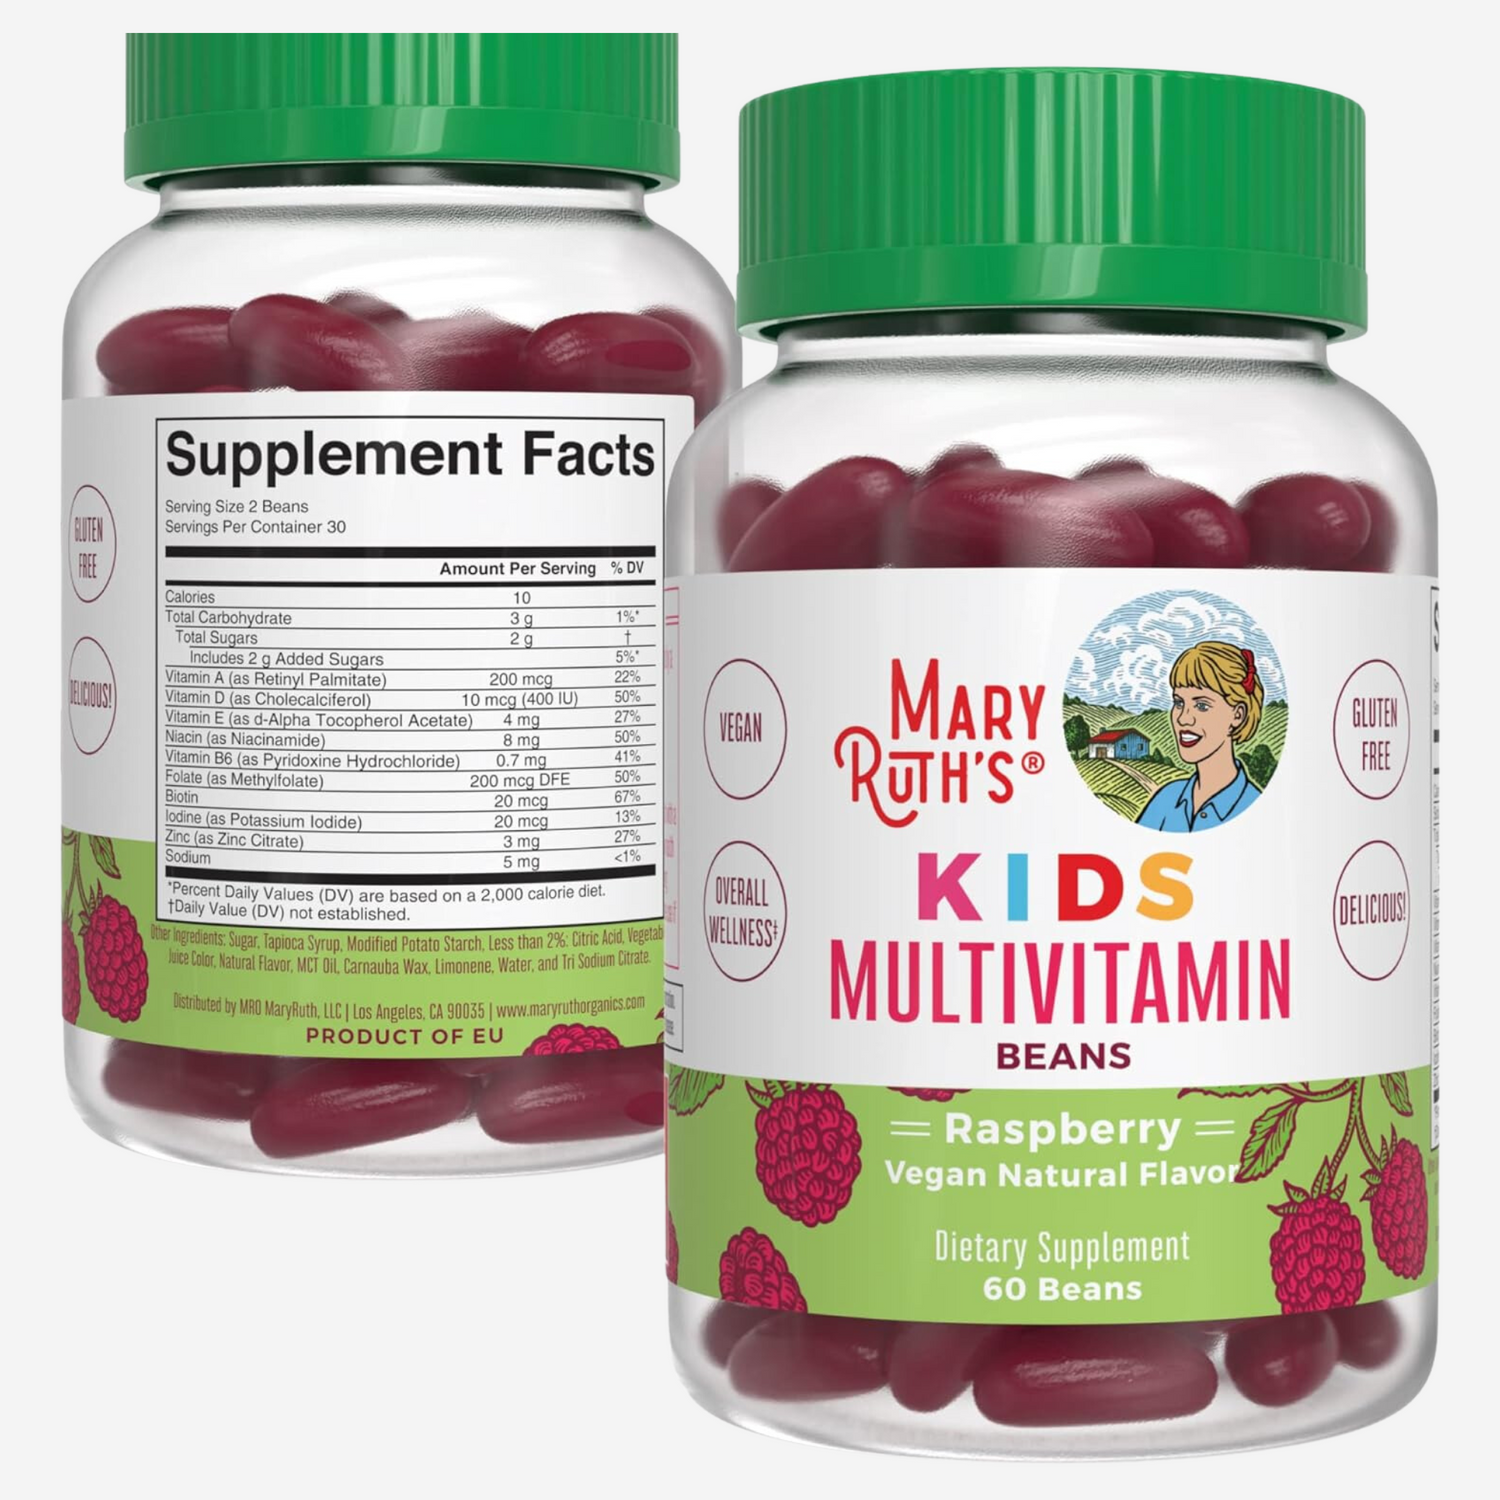 MaryRuth's Multivitamin Multimineral Vita-Beans for Kids Vegan Chewable Vitamins for Ages 4+ 60 Count